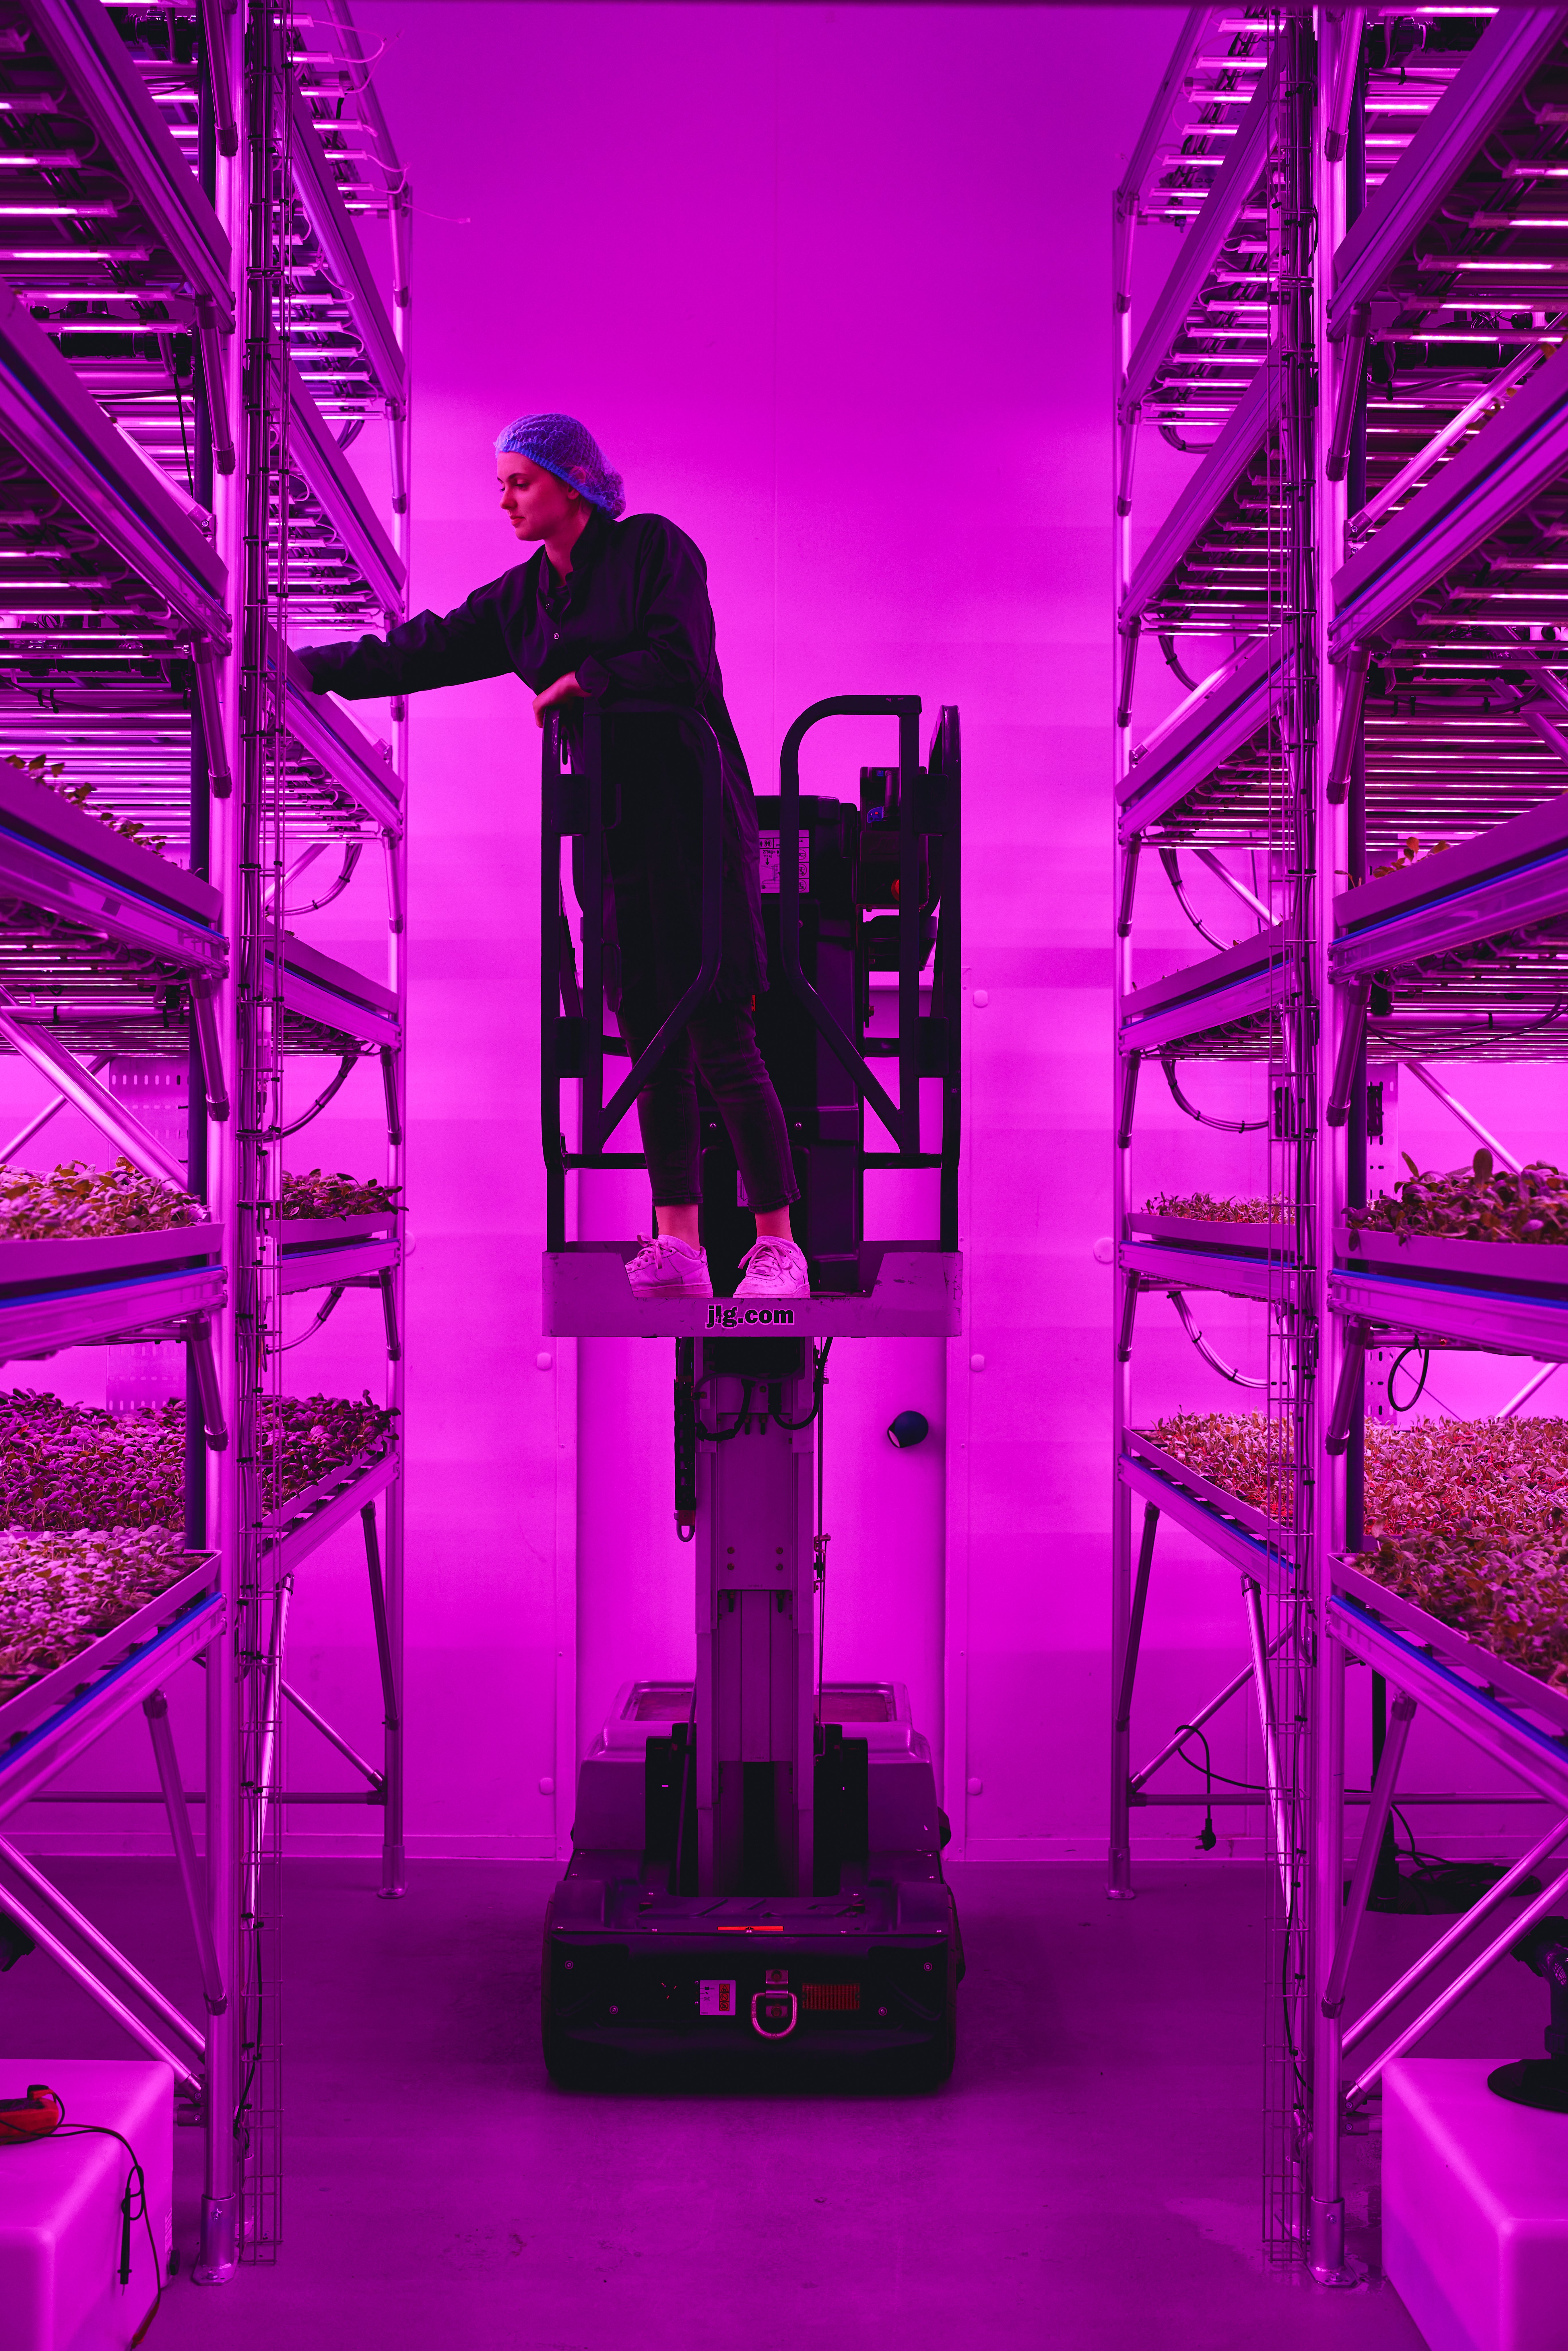 A vertical farm is essentially layers of plants growing on trays, stacked vertically with pipes delivering water, feed and nutrients to the plants, the company said